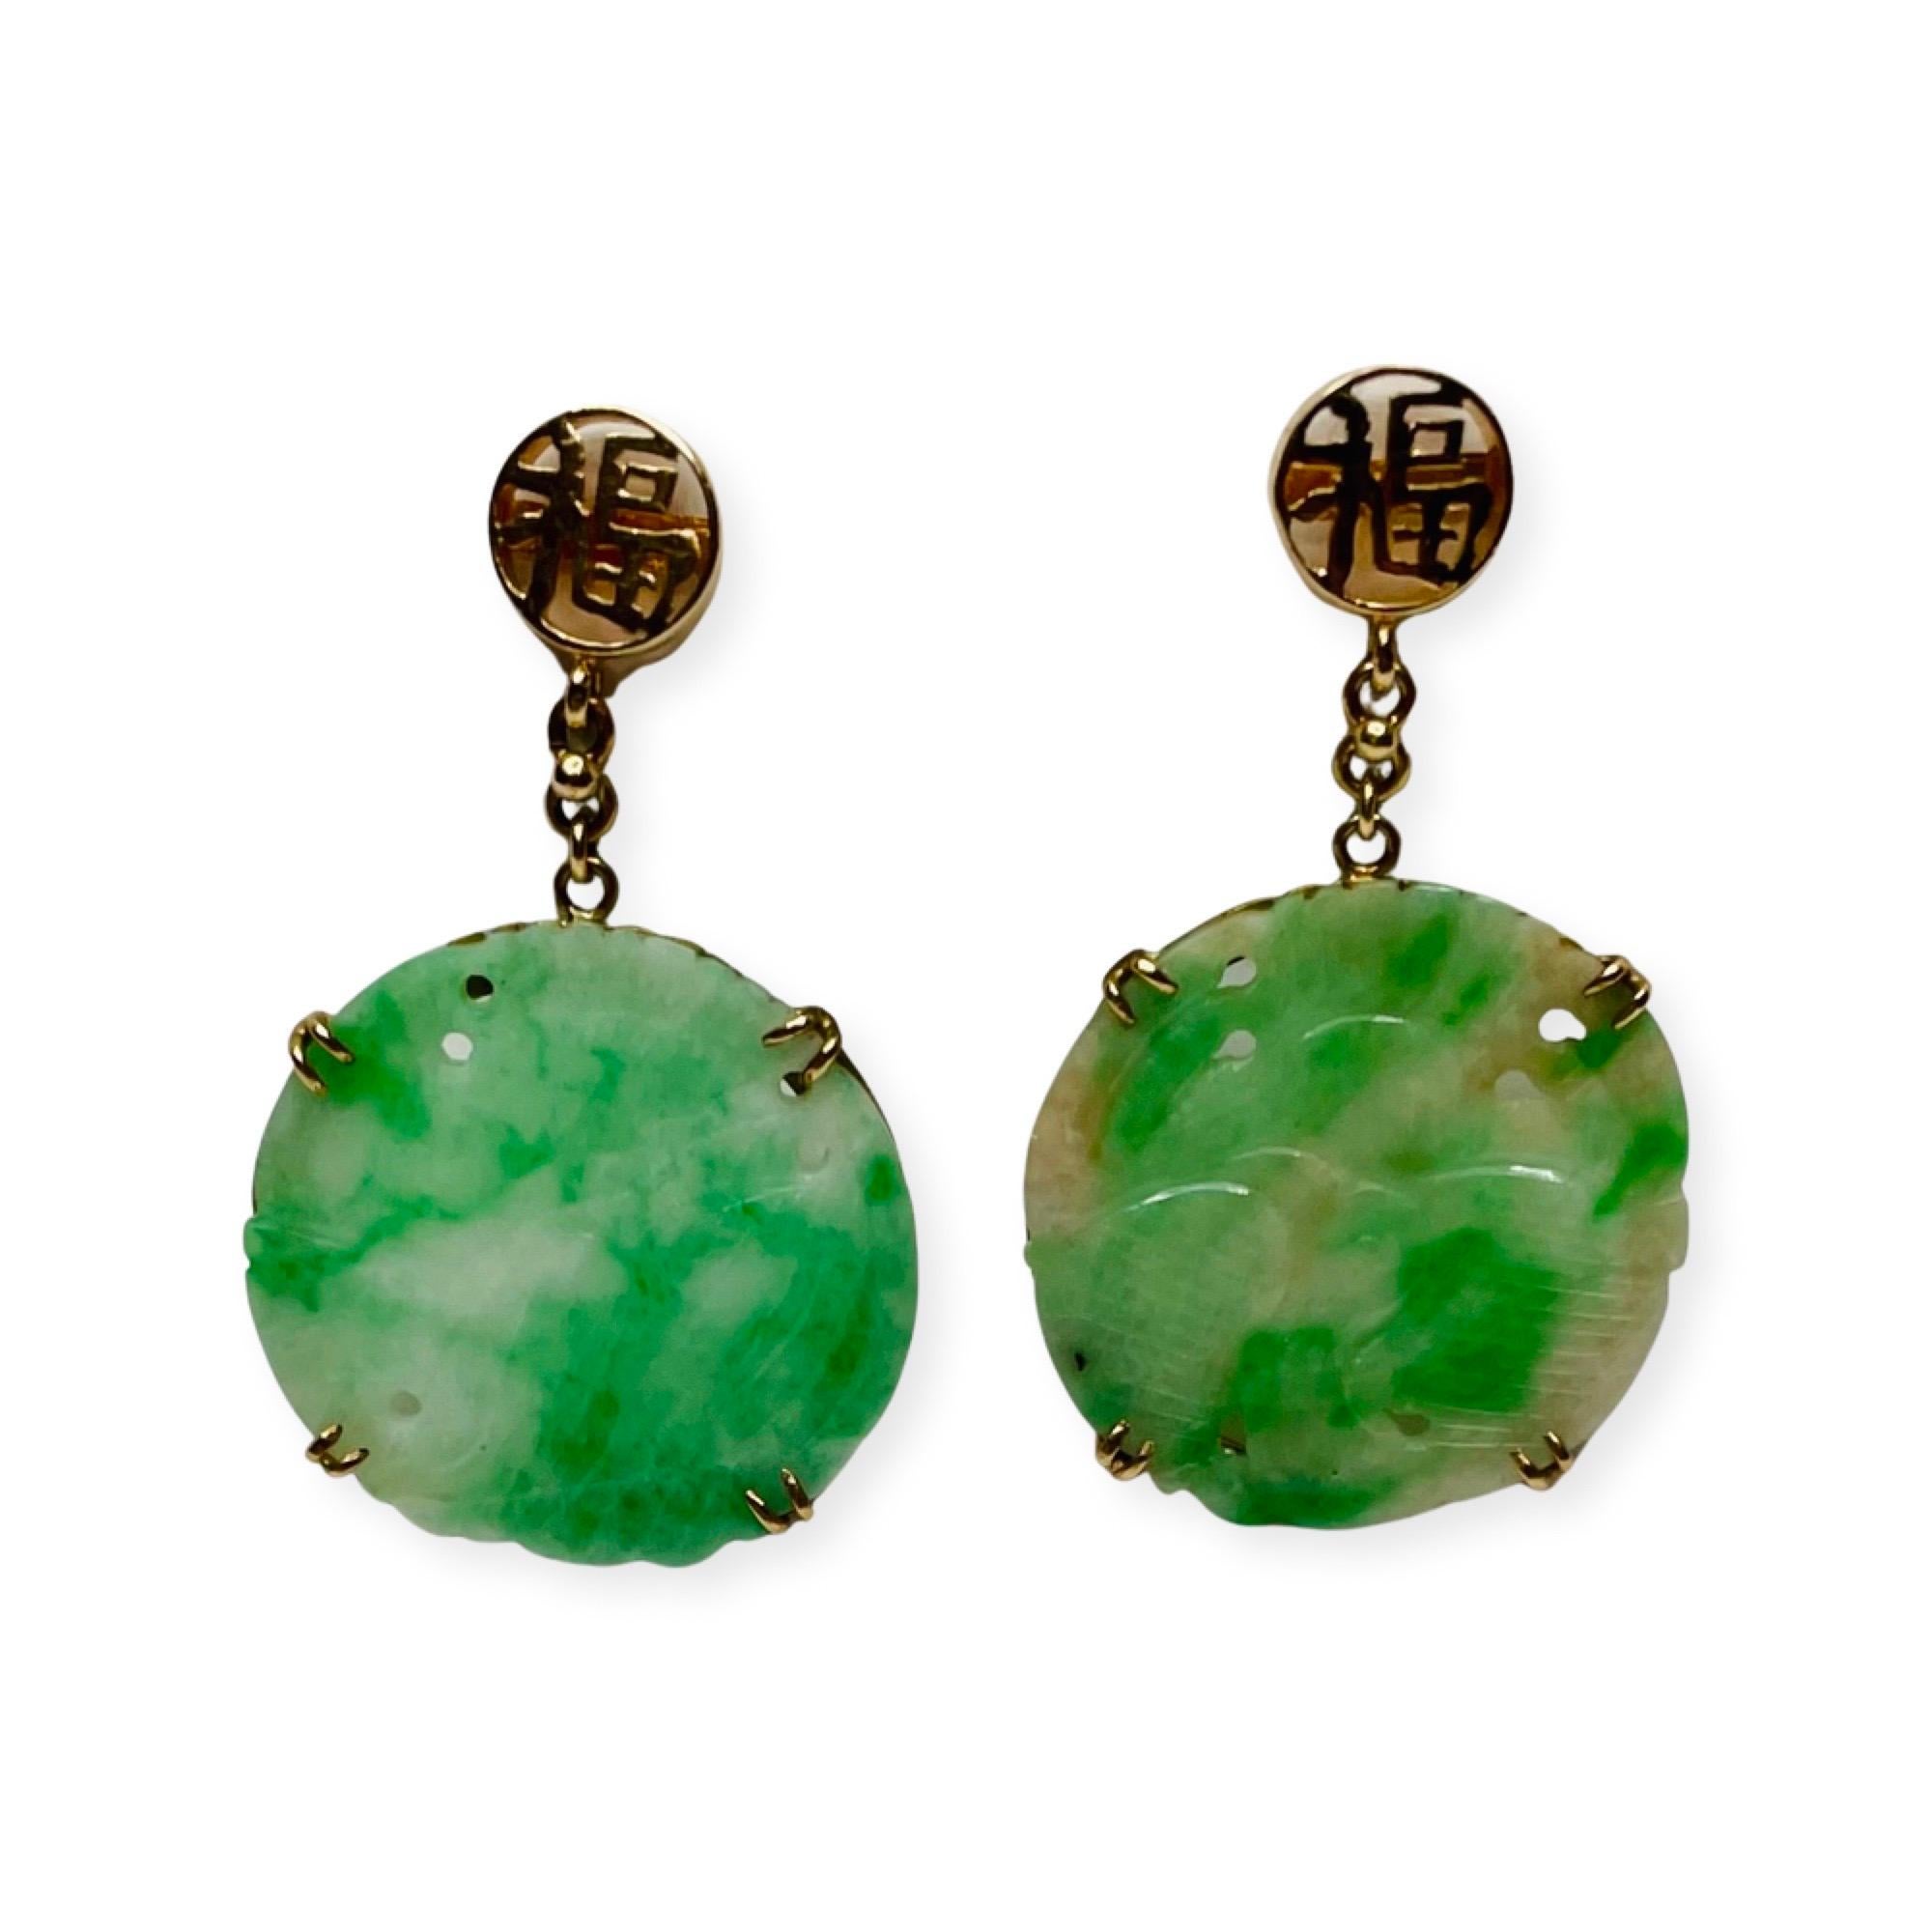 Contemporary Mason Kay 14K Yellow Gold Carved Natural Green Jadeite Earrings